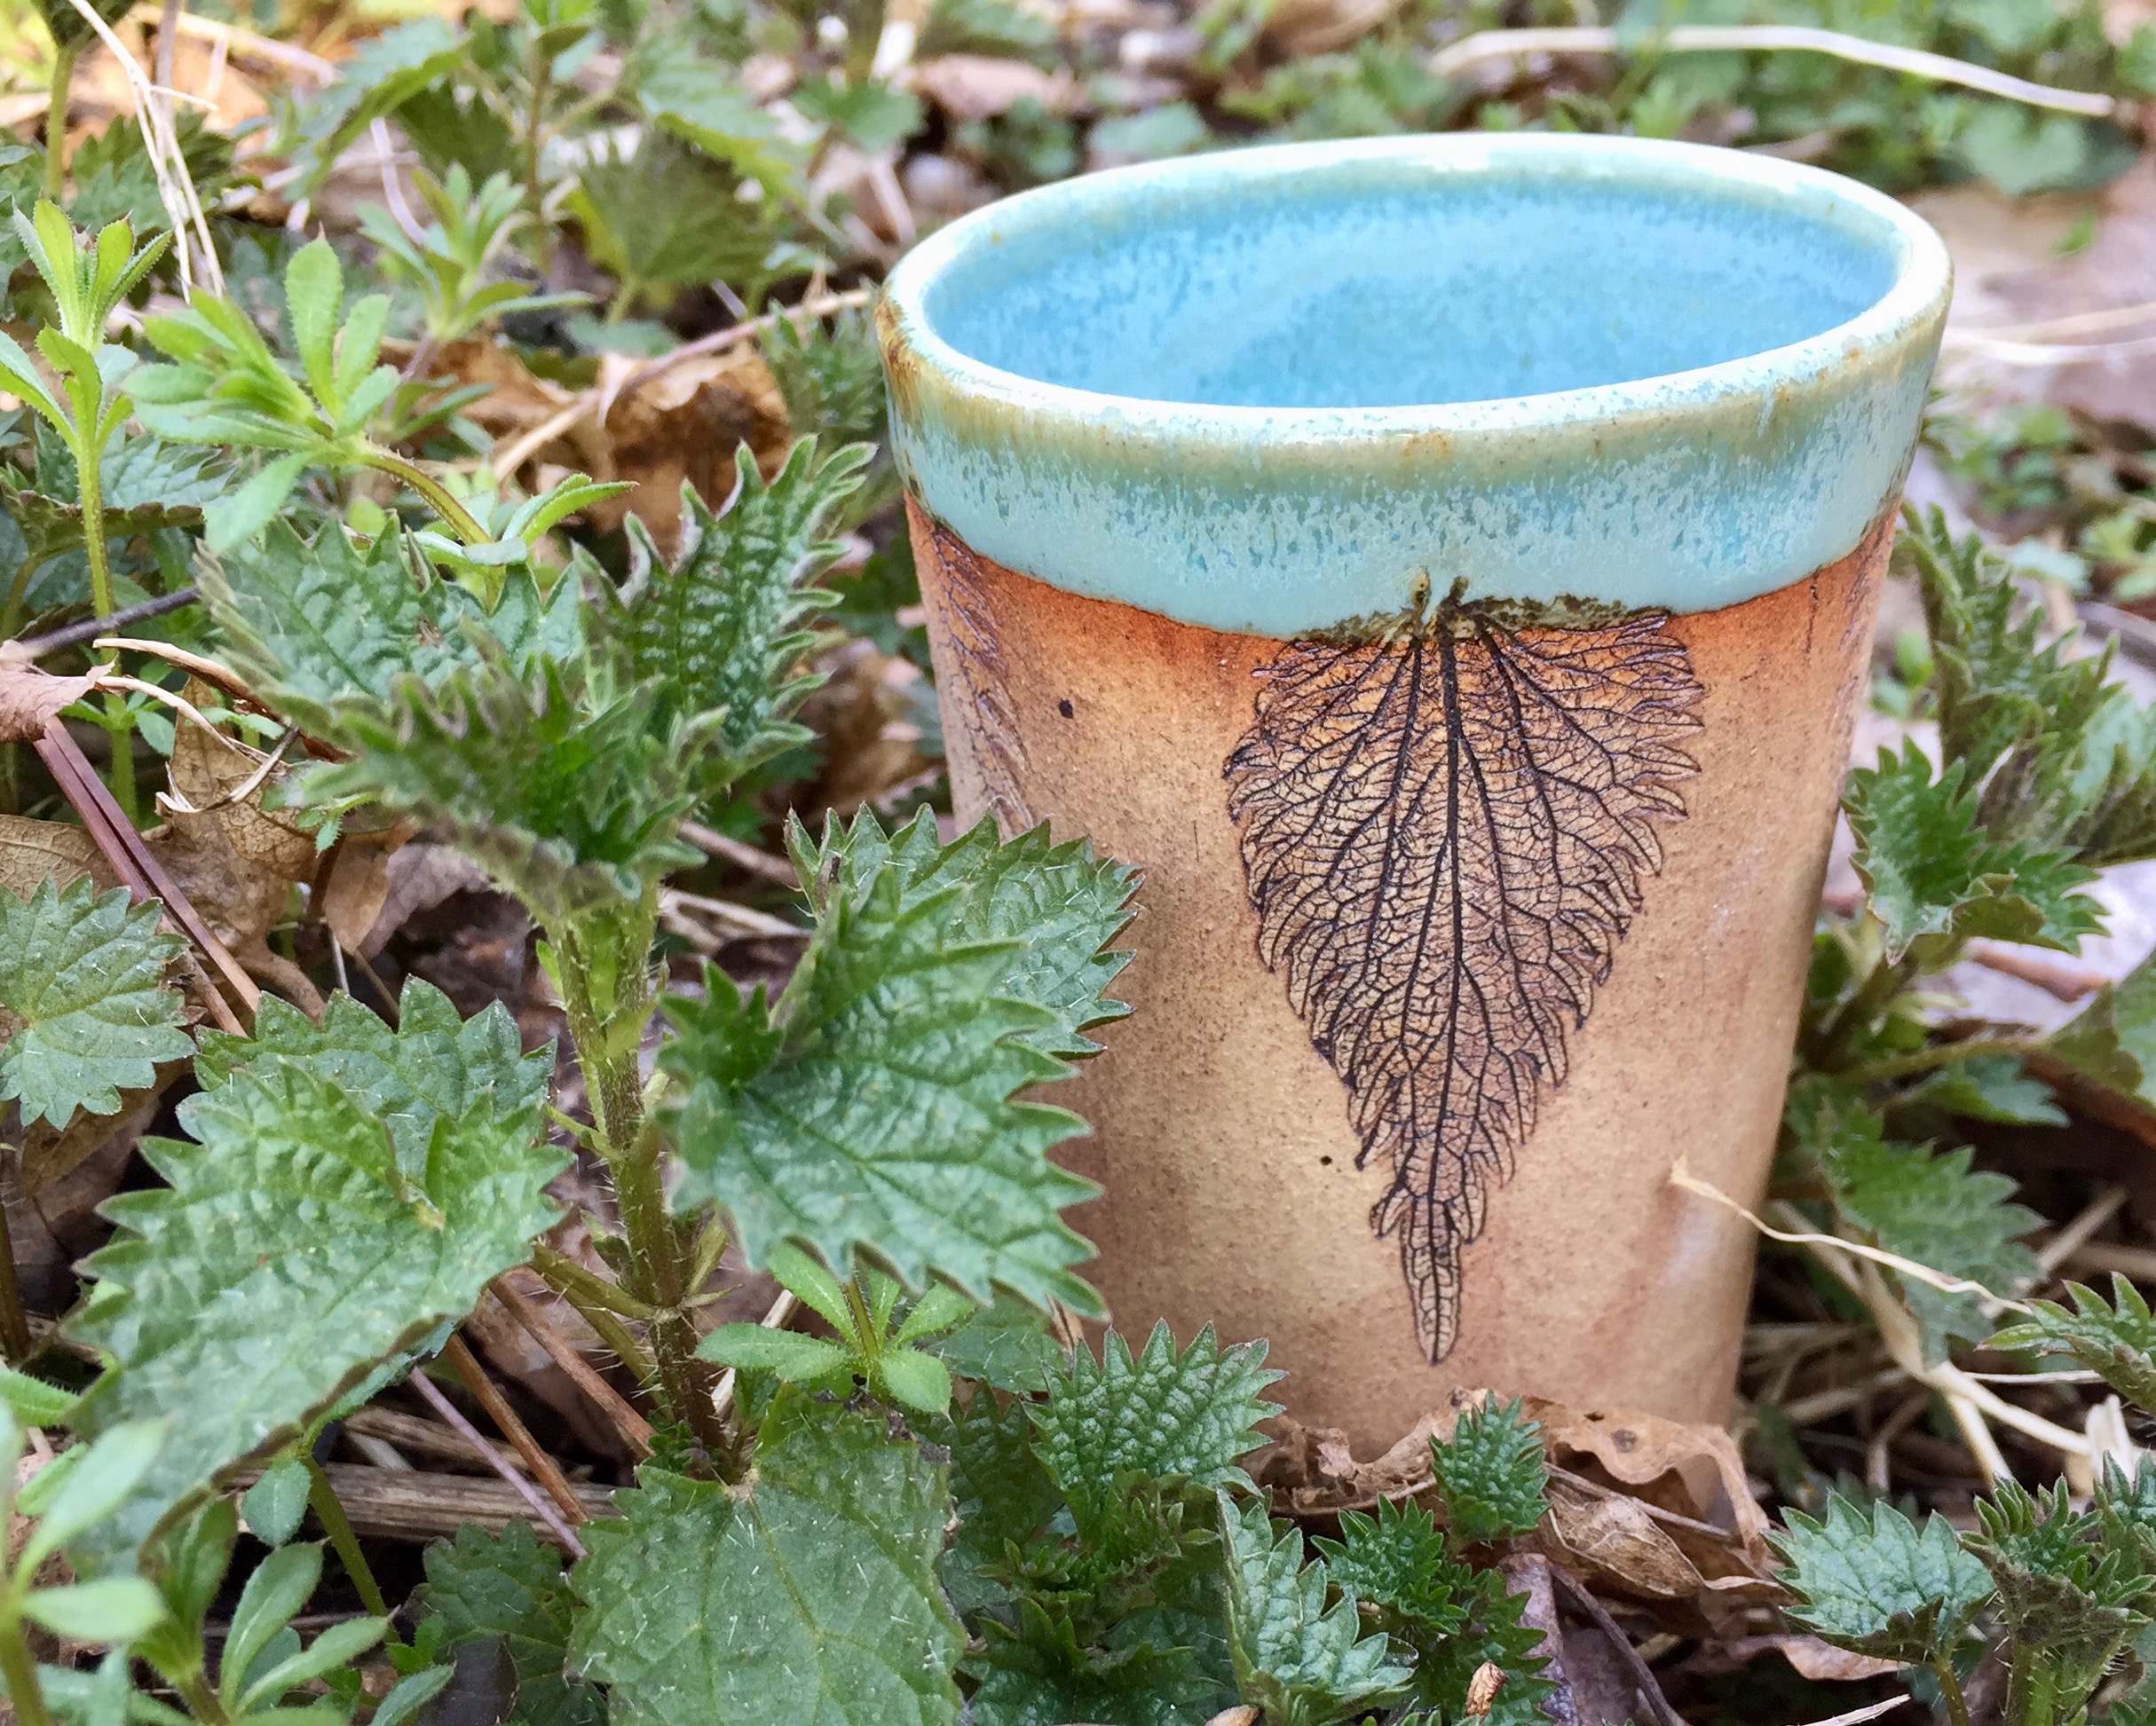 Making Pottery with Plants: An Interview with Zoe Gardner